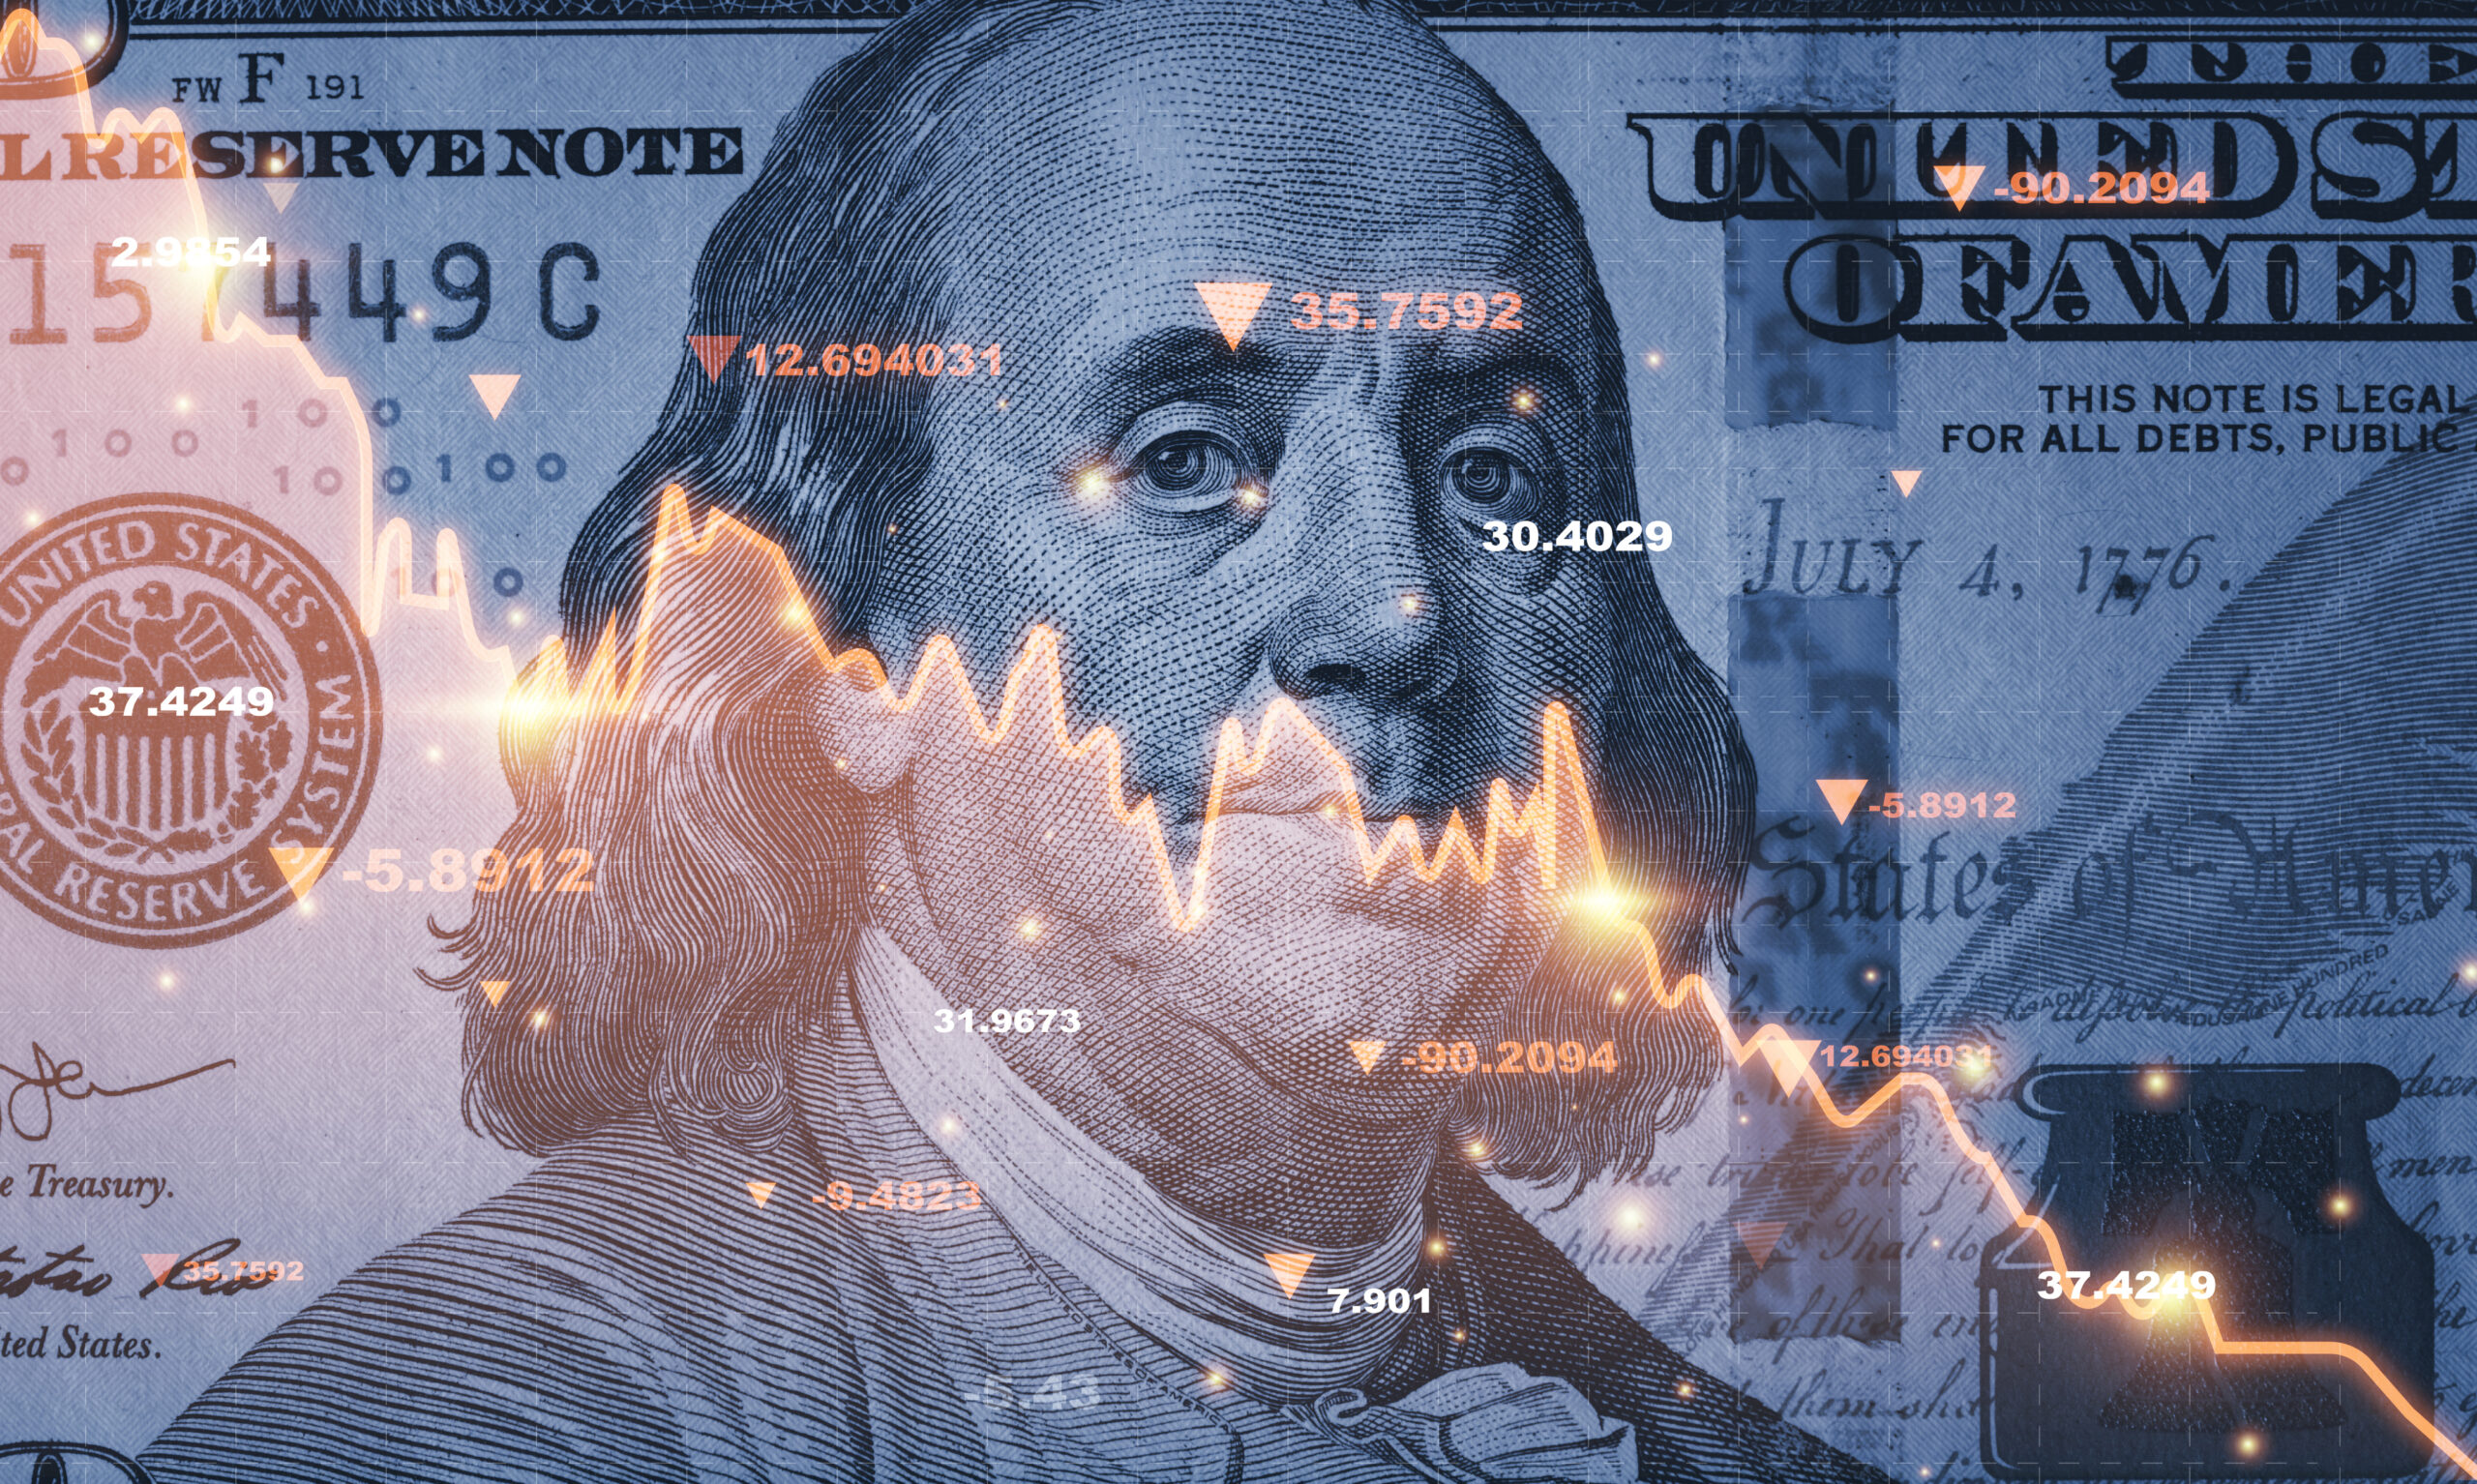 Benjamin Franklin face on USD dollar banknote with red decreasing stock market graph chart for symbol of economic recession crisis concept.